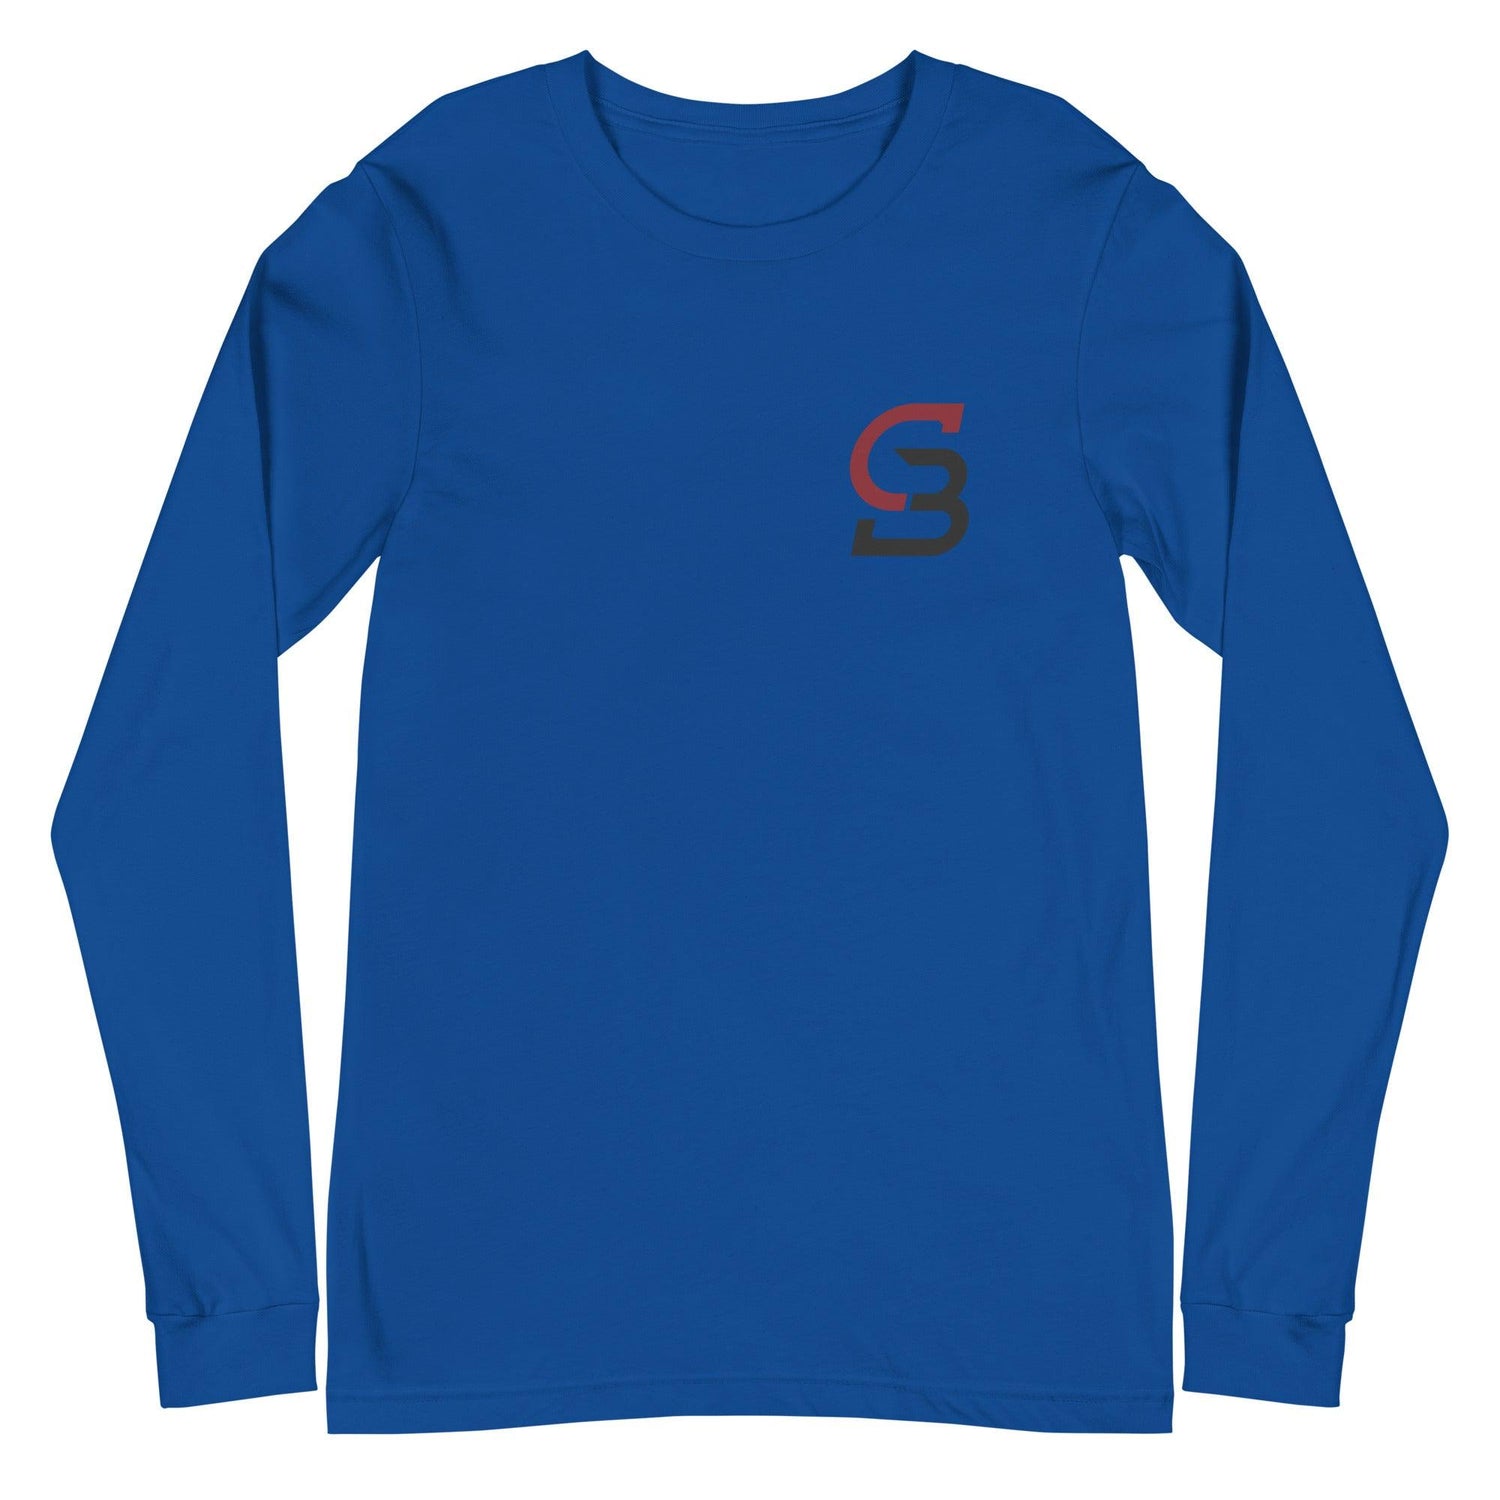 Catherine Barry "Signature" Long Sleeve Tee - Fan Arch